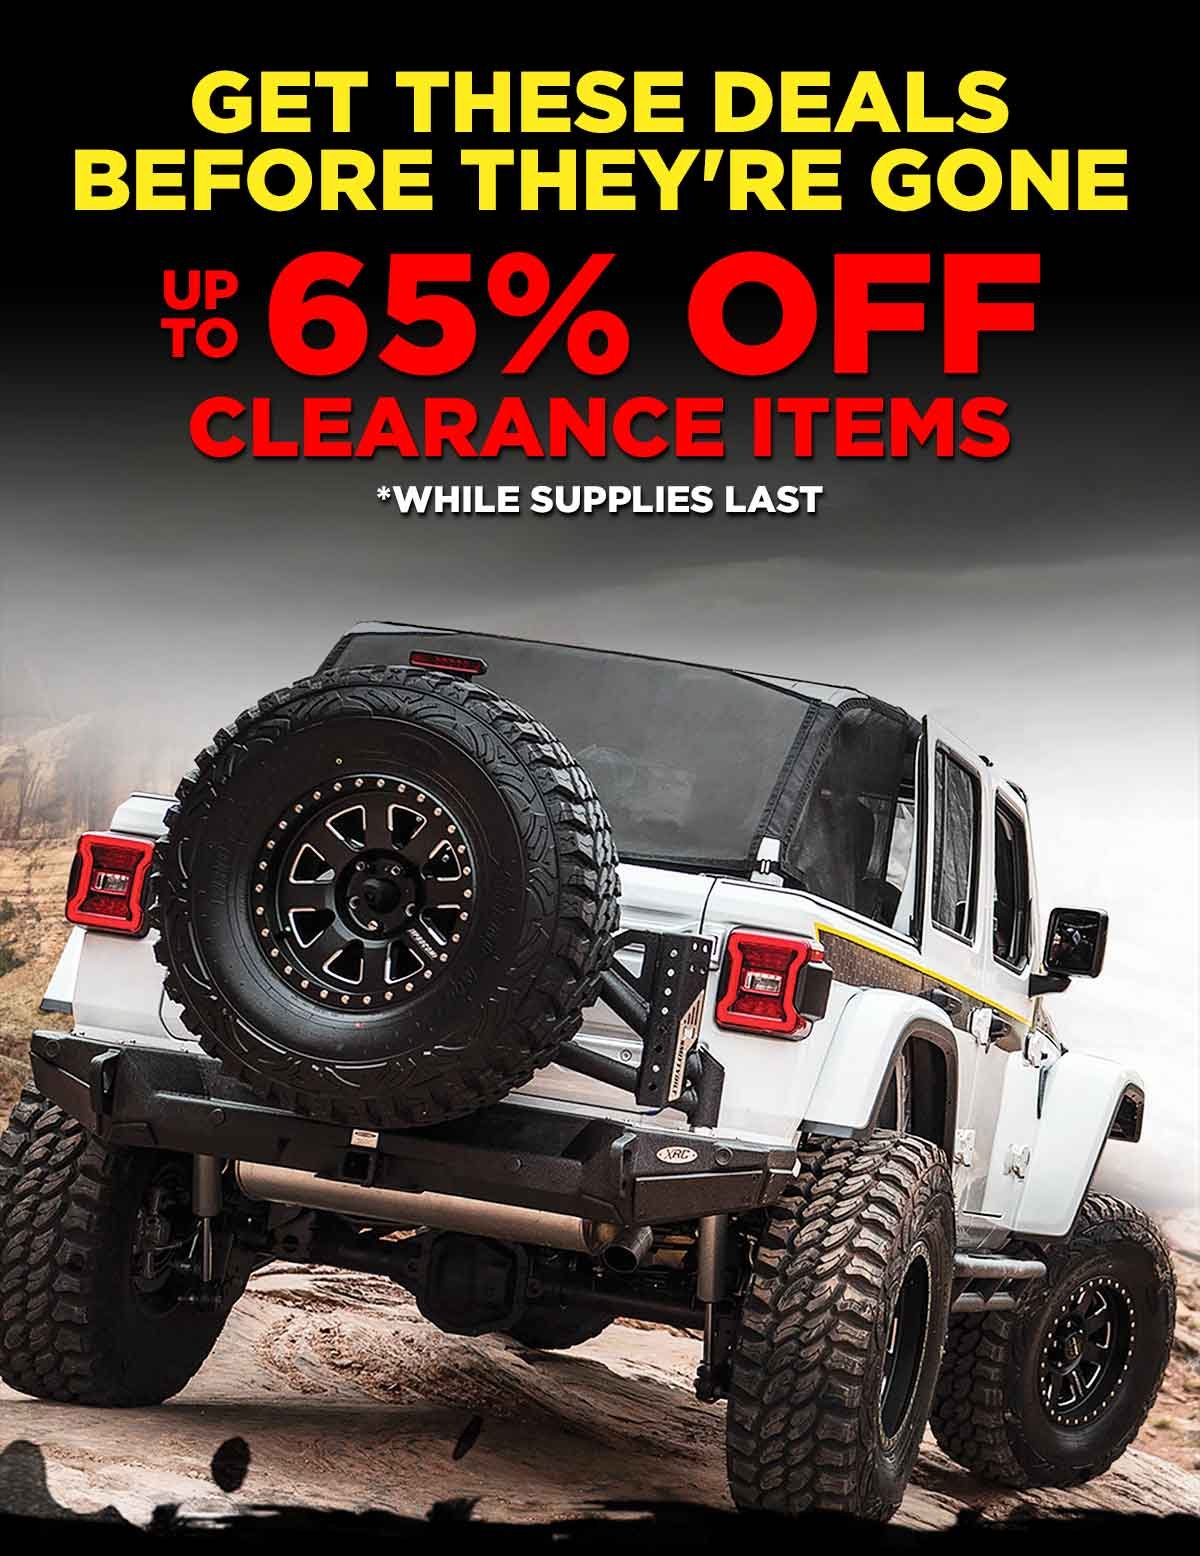 Get These Deals Before They're Gone Up to 65% Off Clearance Items *While Supplies Last